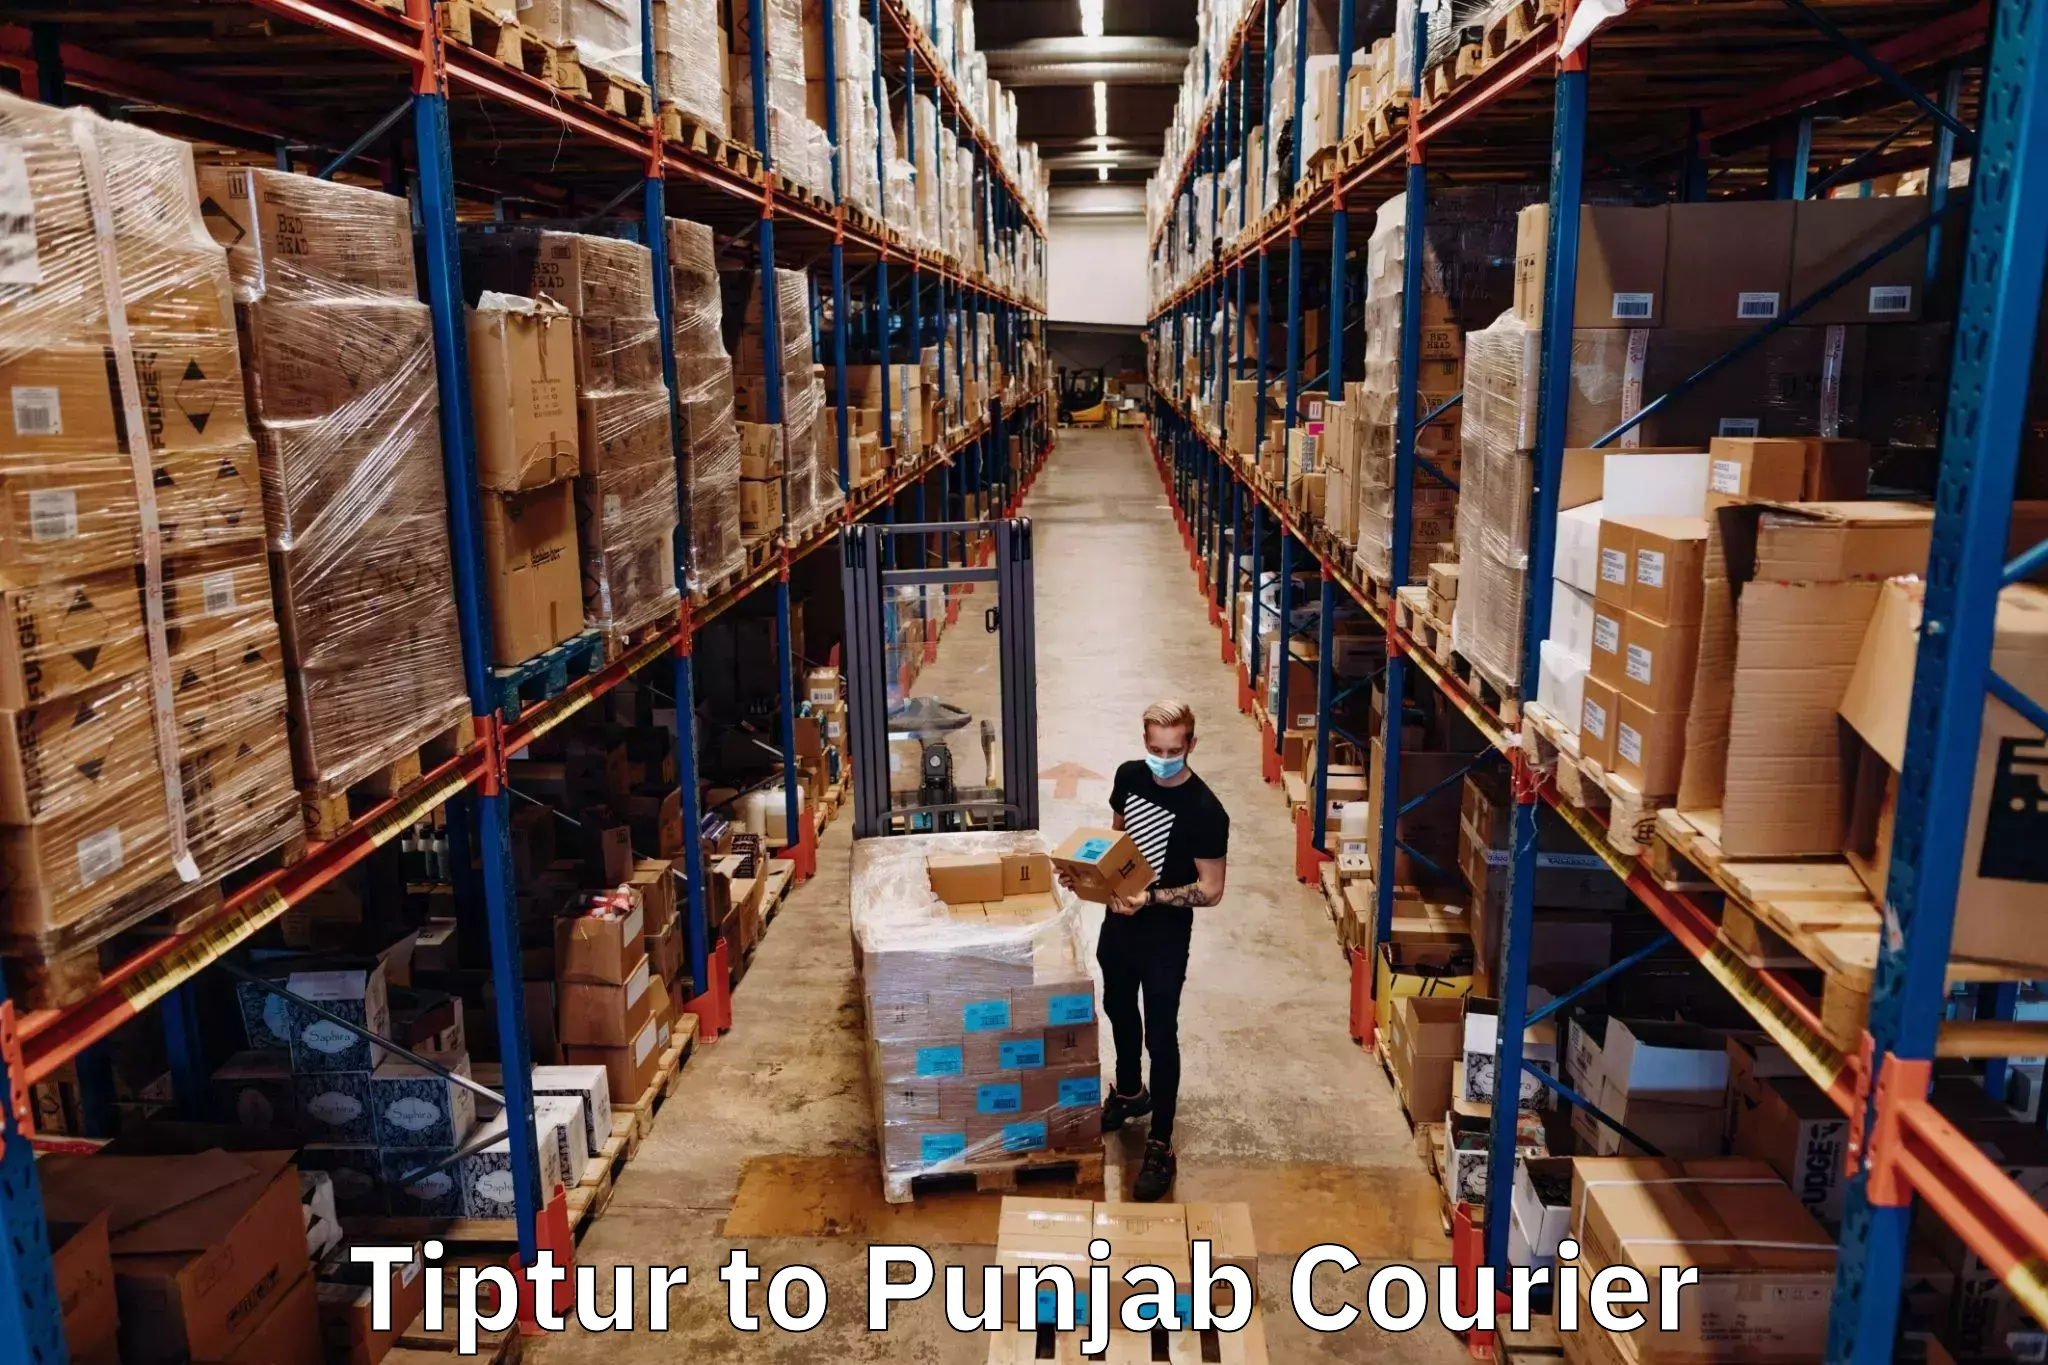 Full-service courier options Tiptur to Punjab